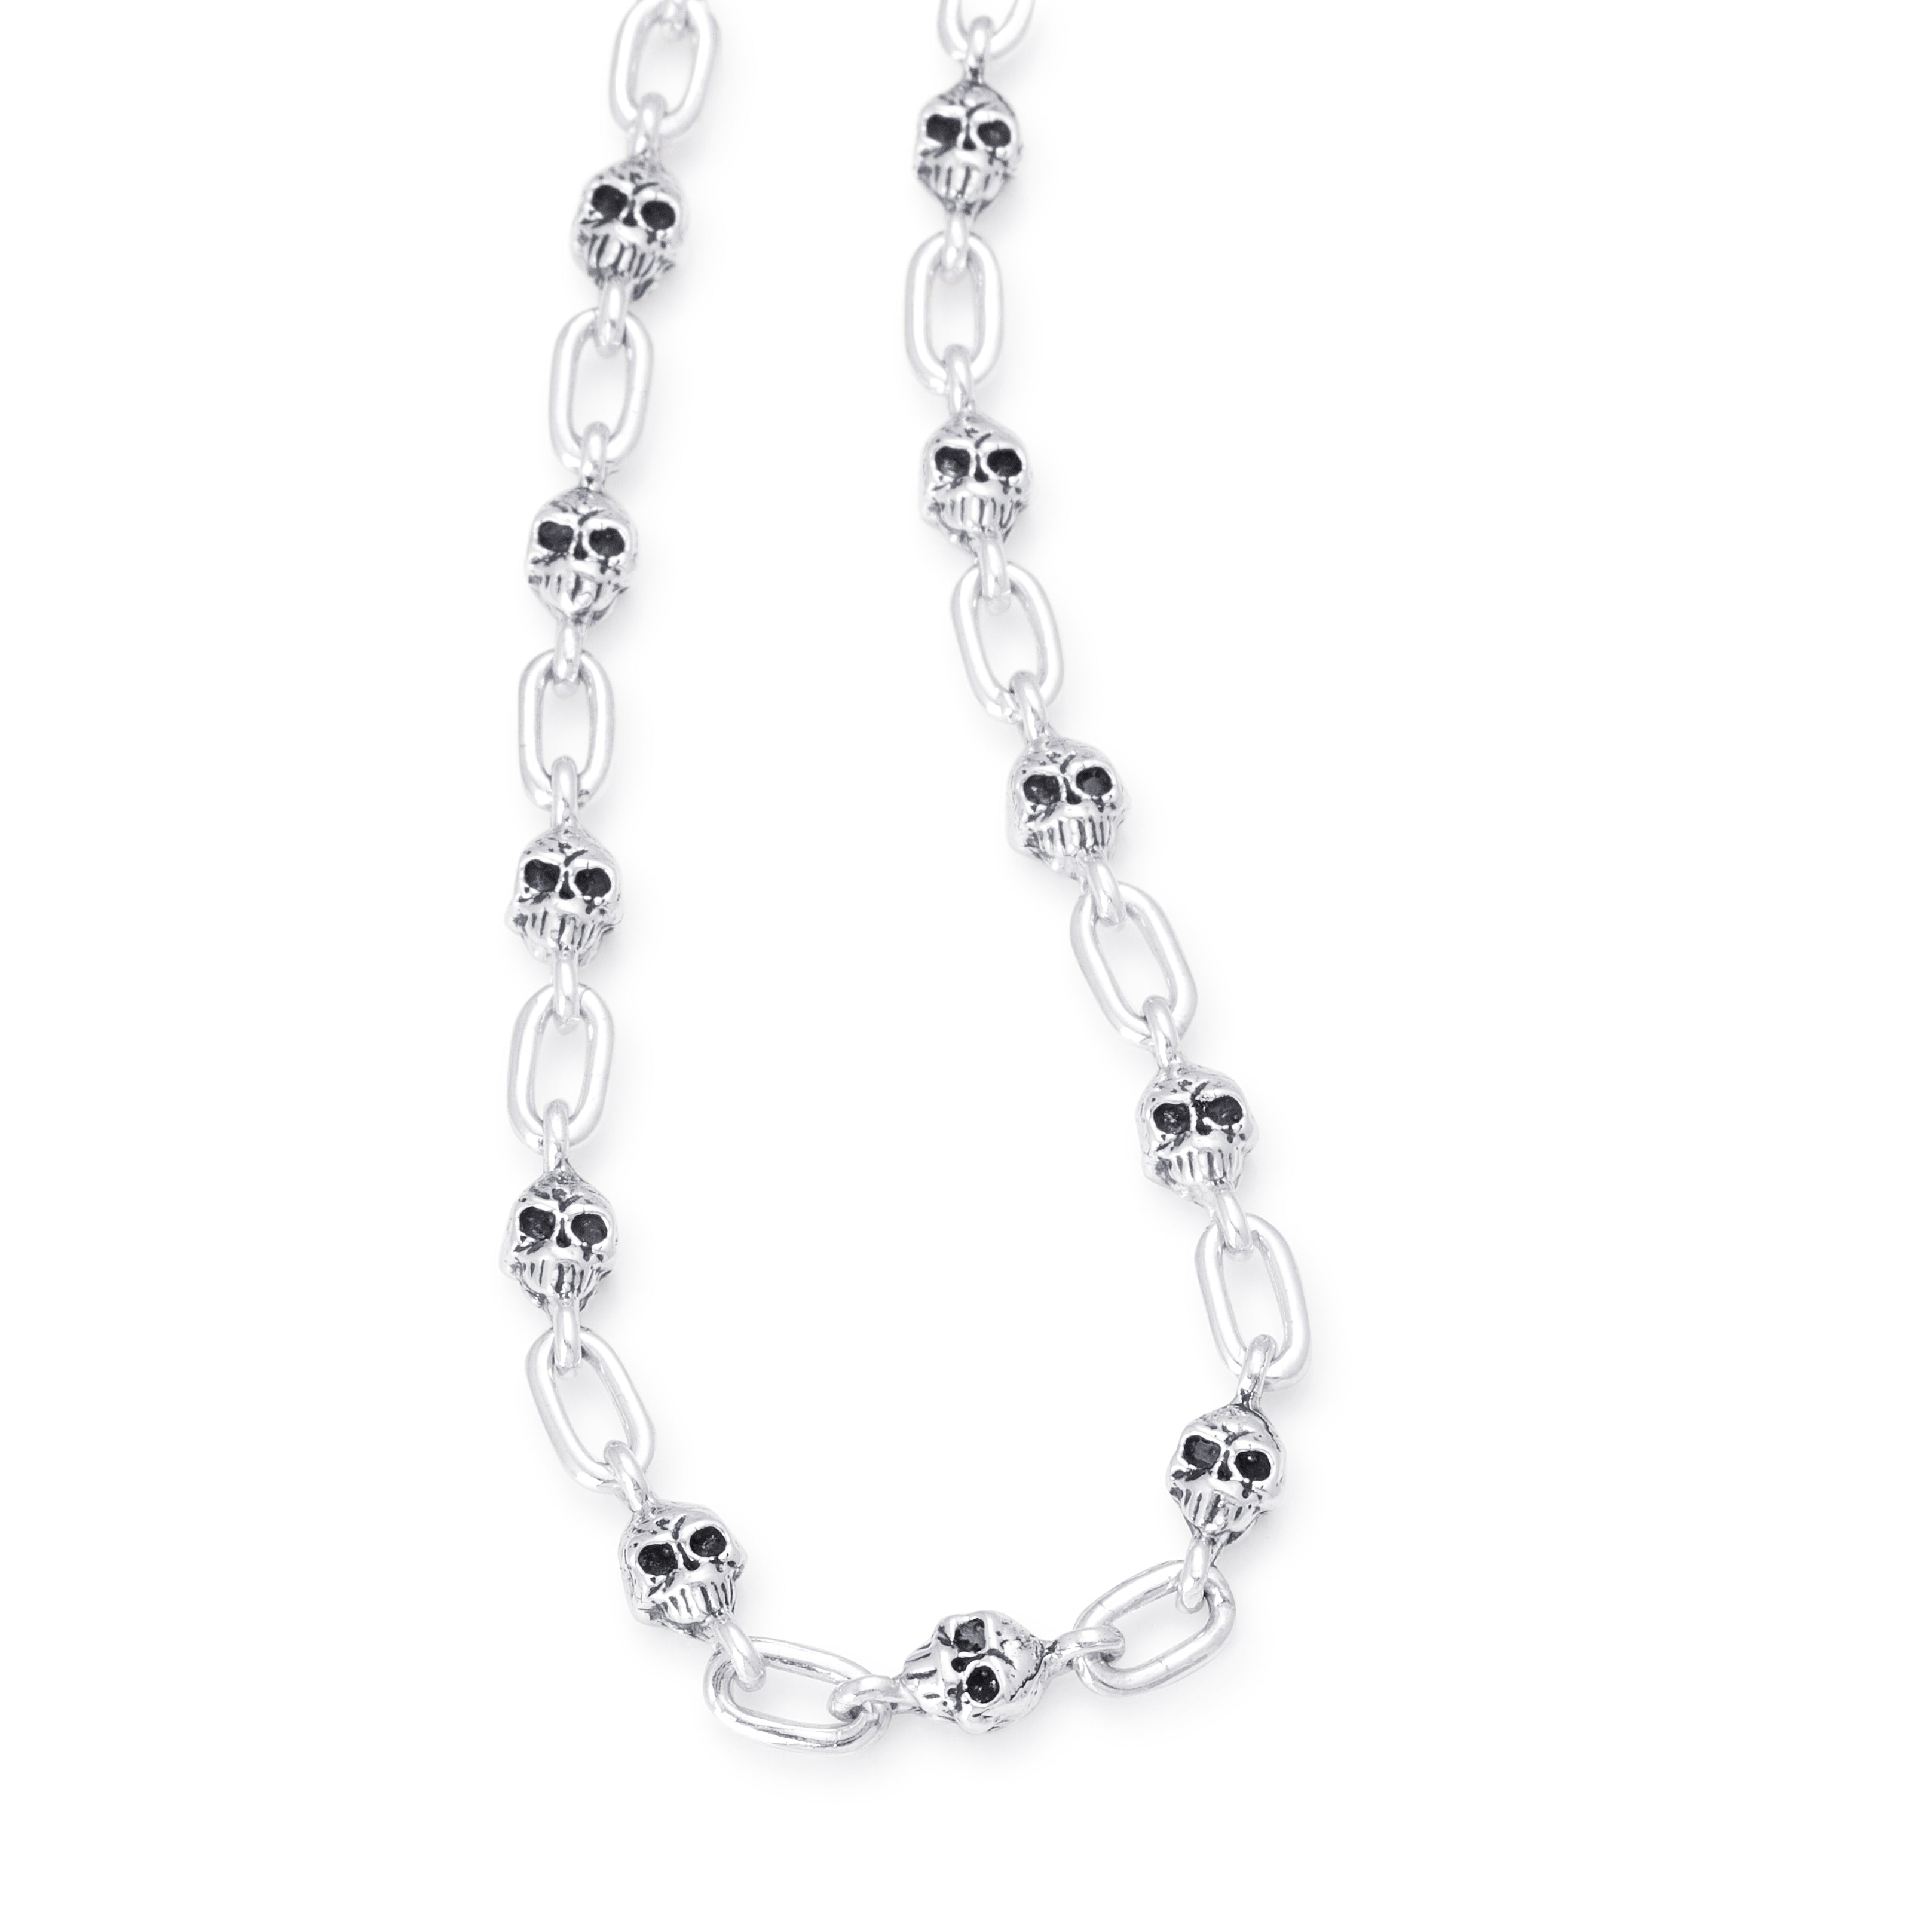 Solid Sterling Silver petite skull links joined with classic open links, T-toggle clasp 